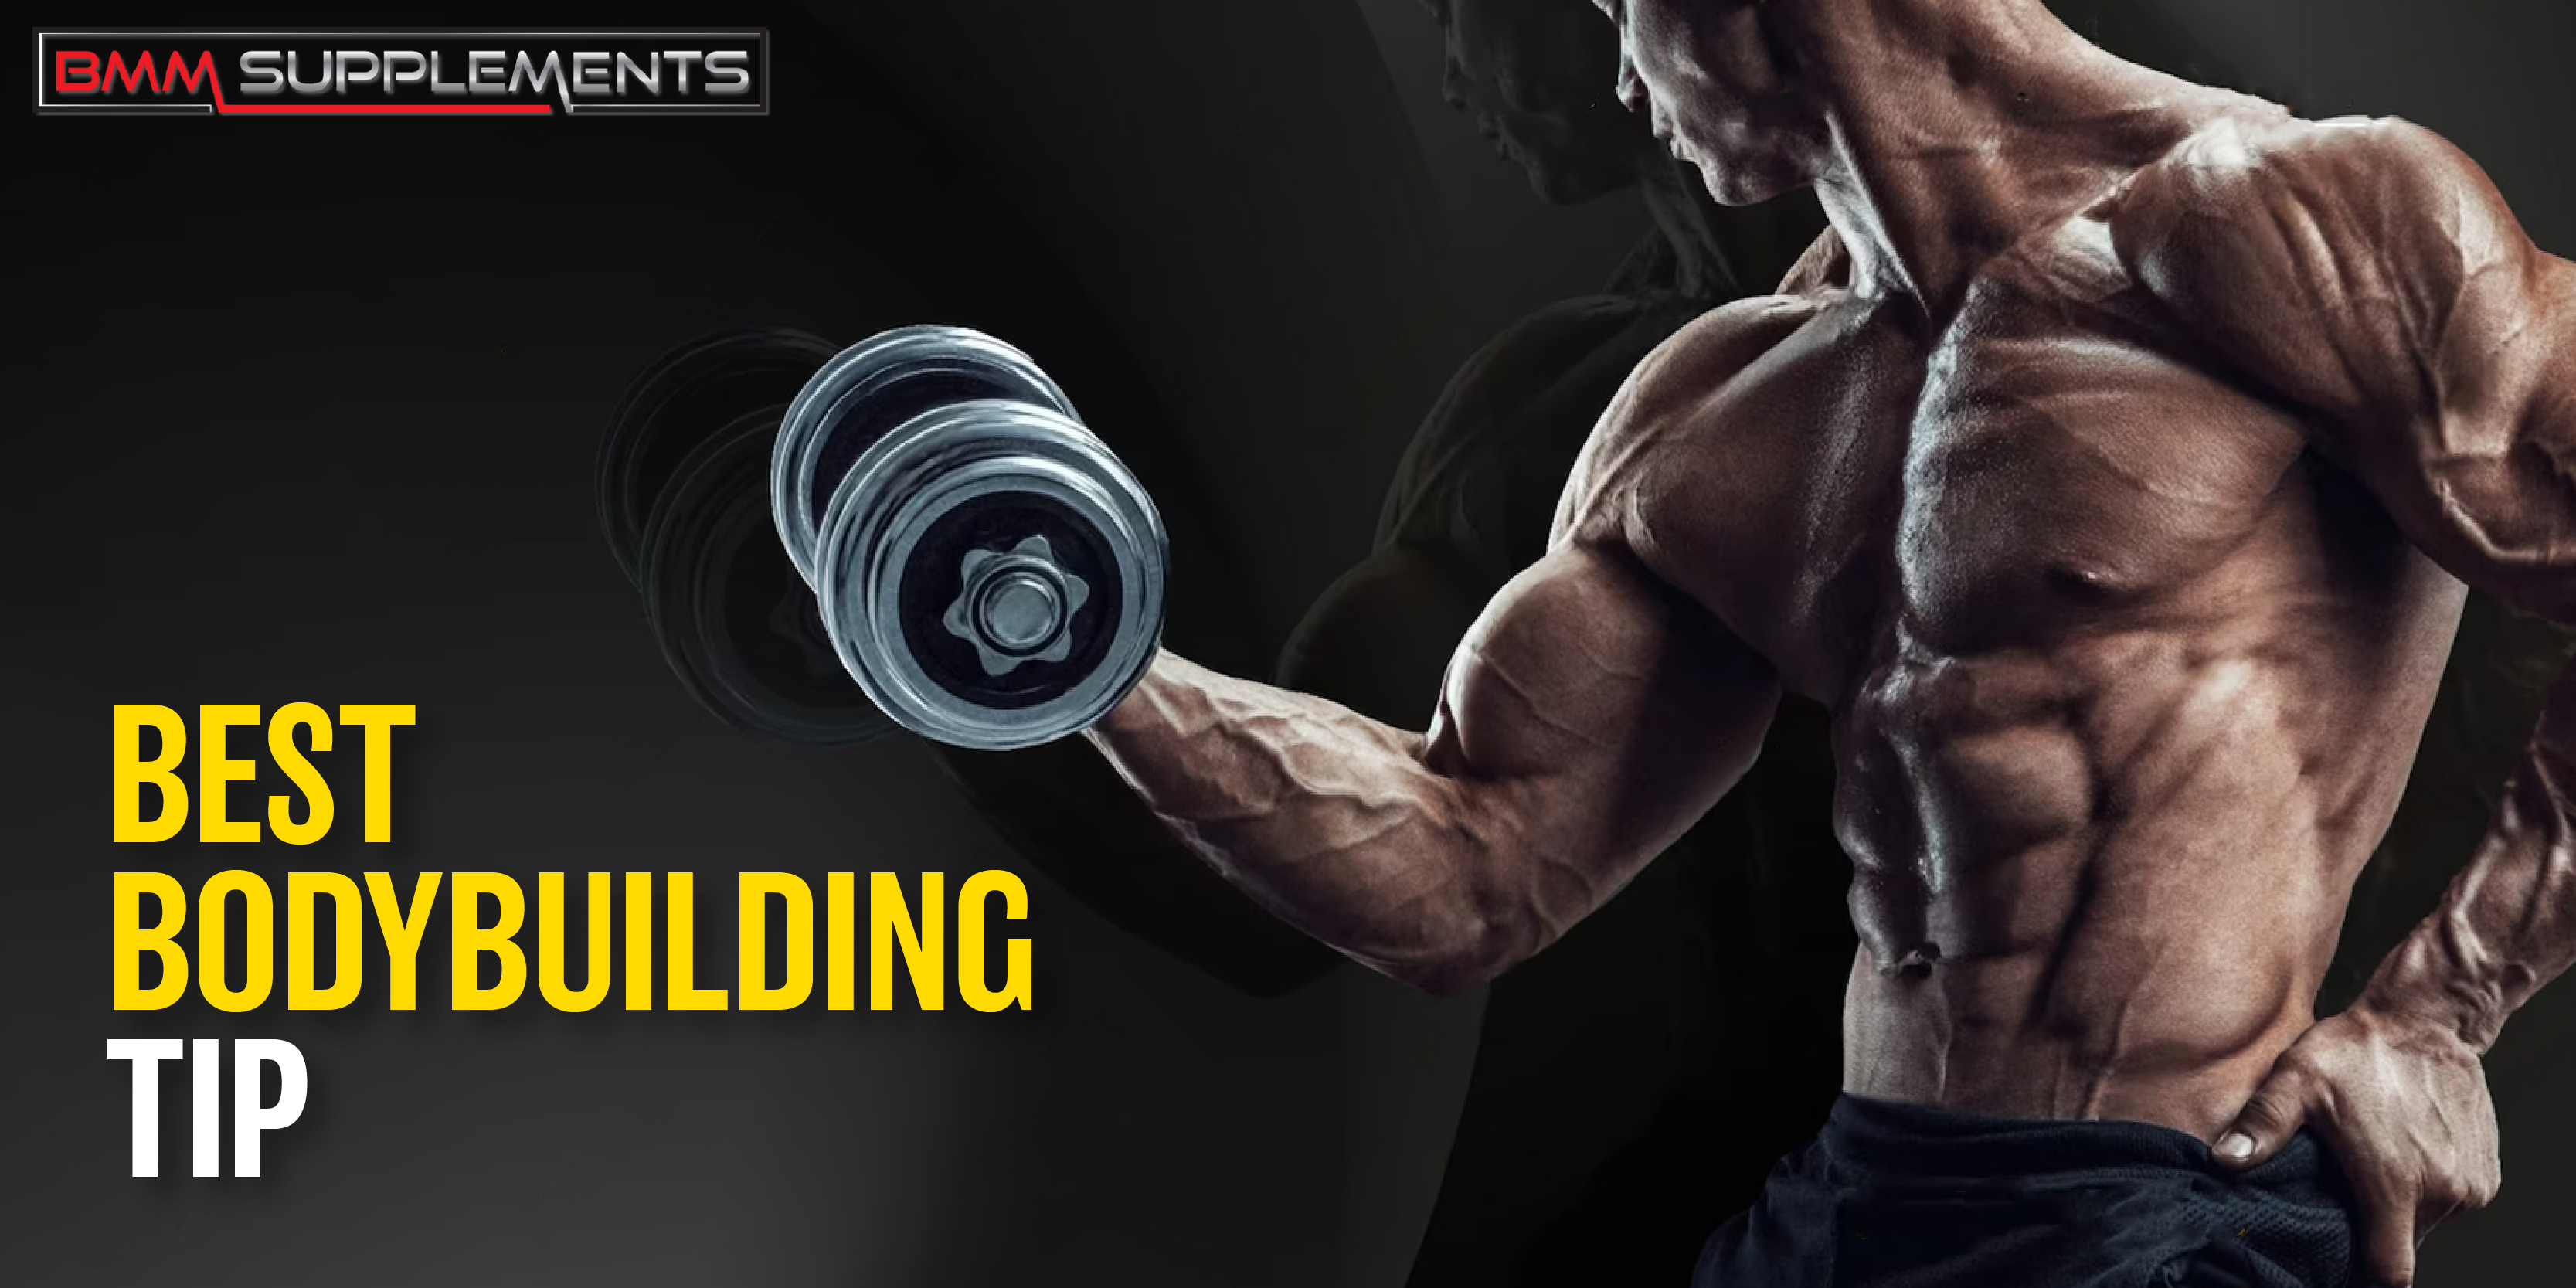 Are You a Lifting Newbie: Here are Our Top Tips